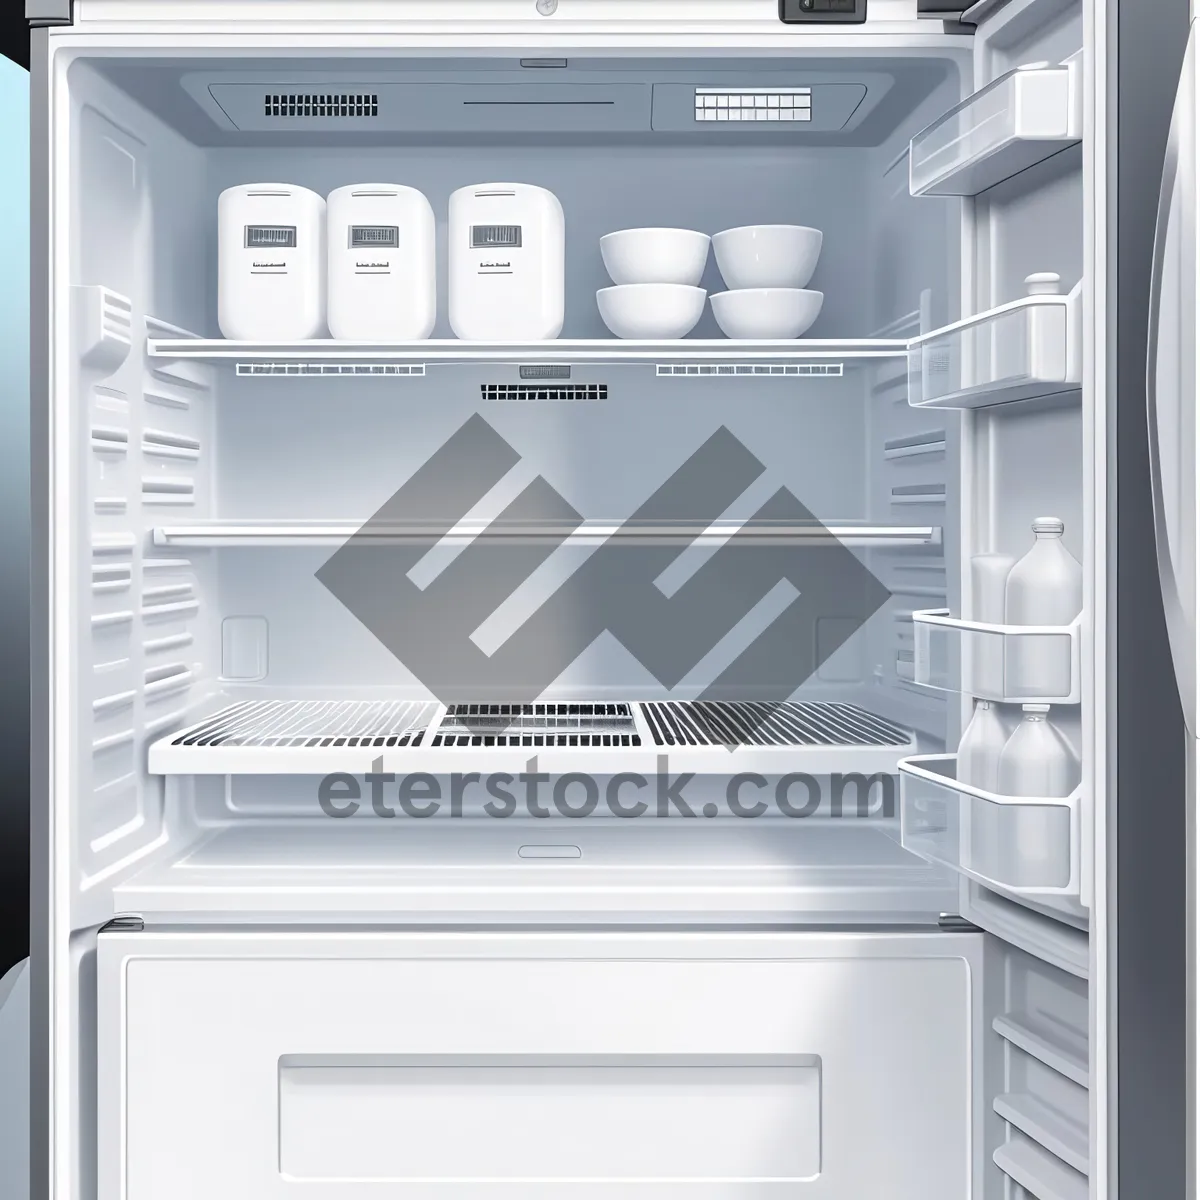 Picture of Modern Kitchen Interior with White Goods and Appliances